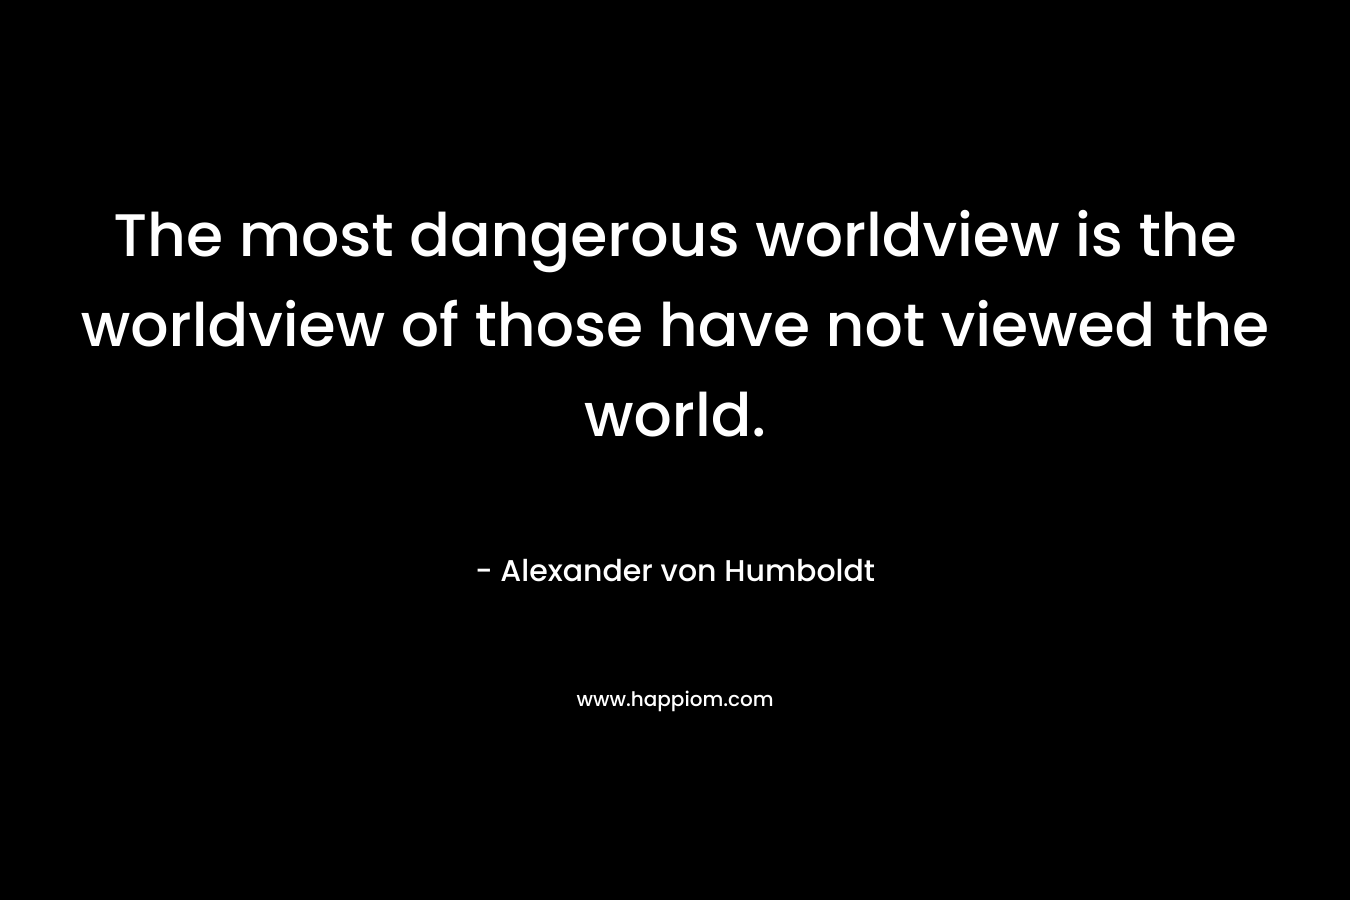 The most dangerous worldview is the worldview of those have not viewed the world. – Alexander von Humboldt